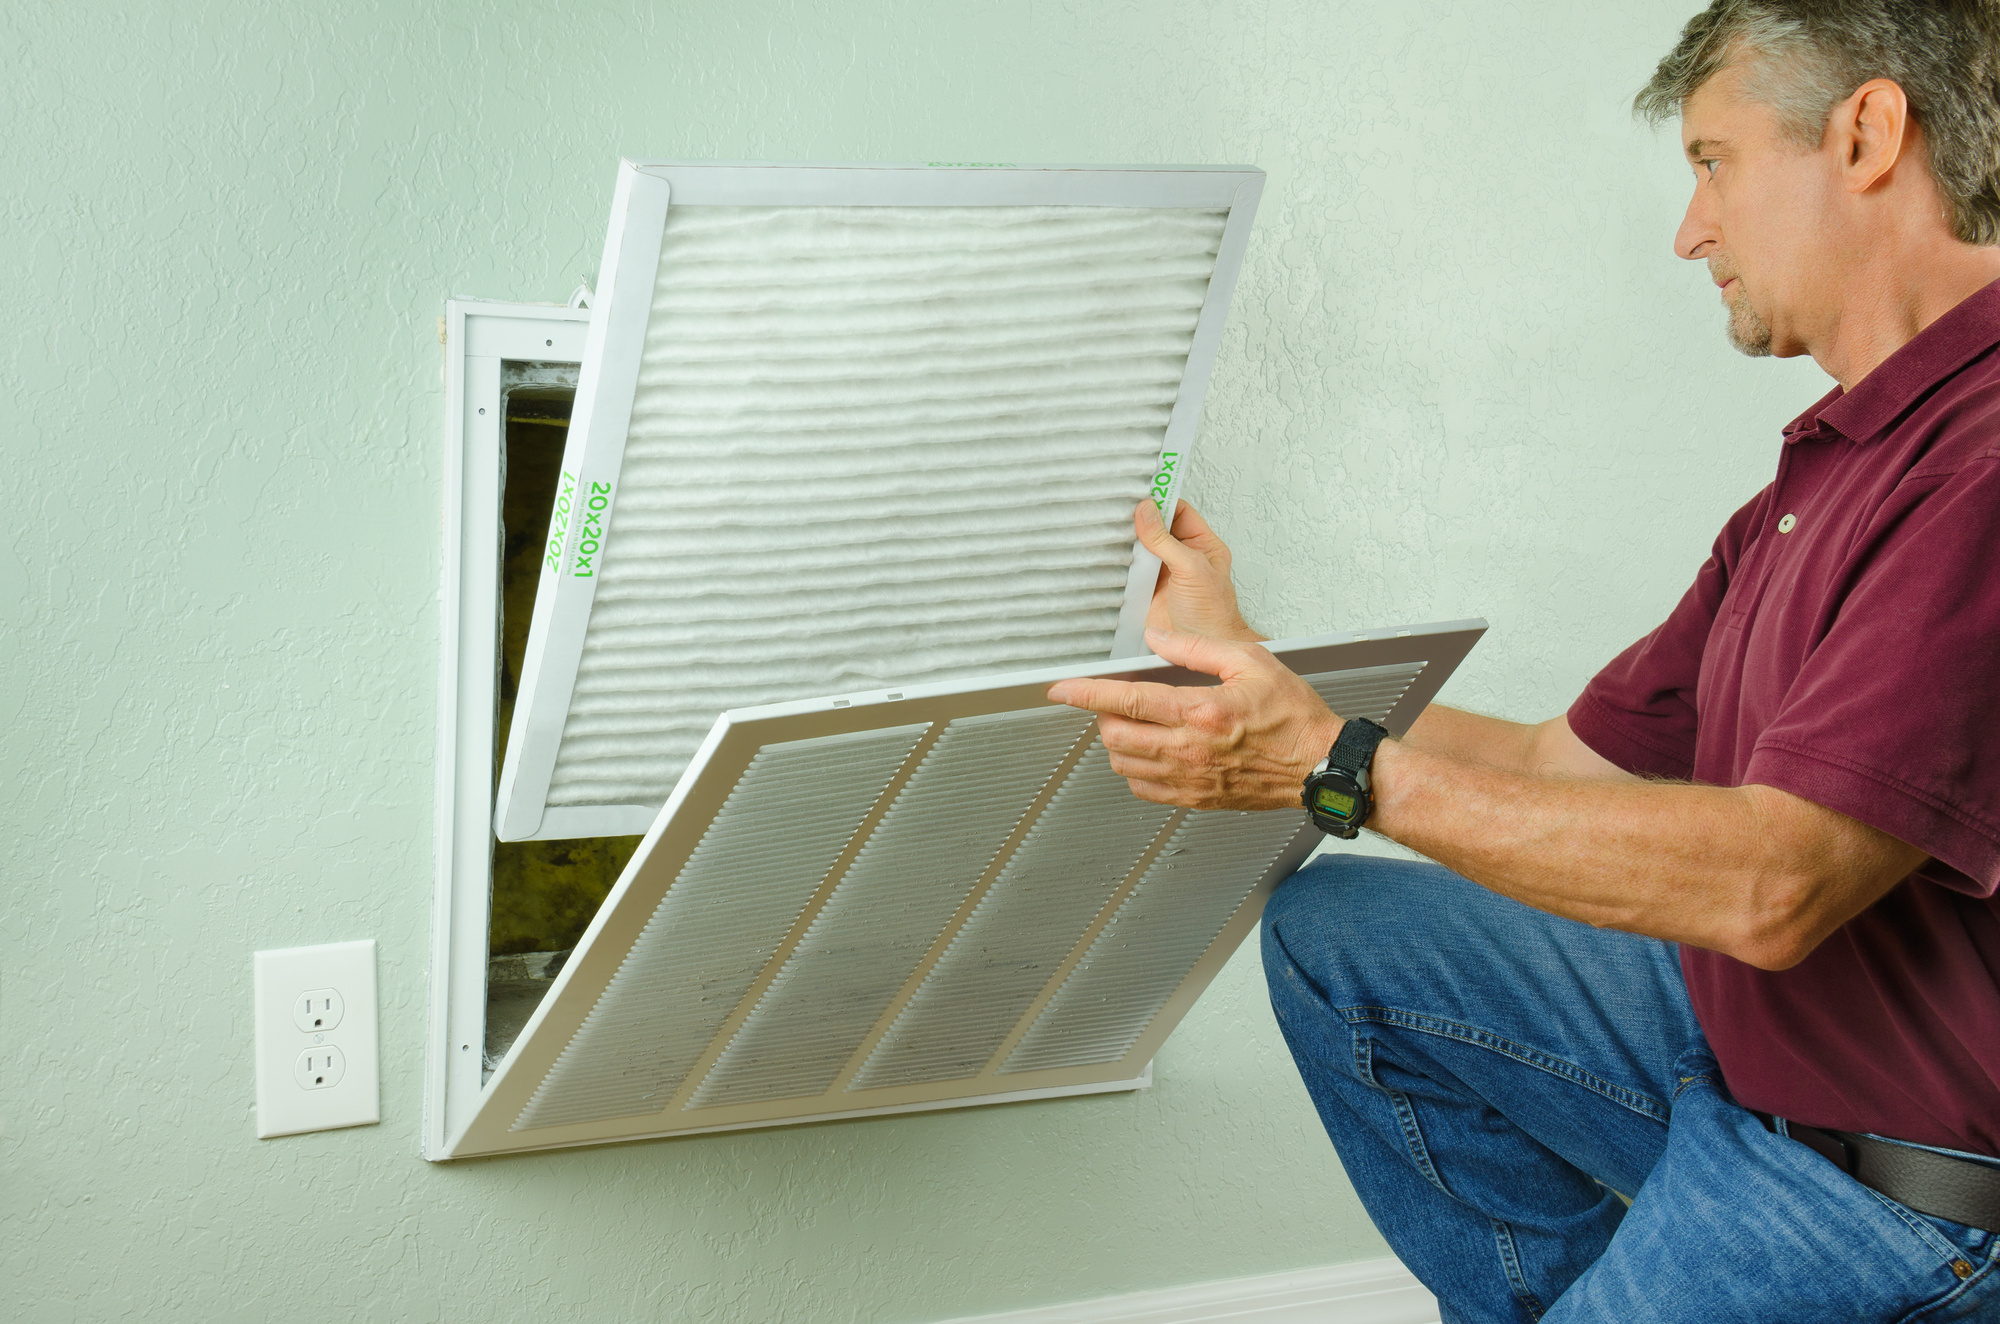 DIY Air Duct Cleaning